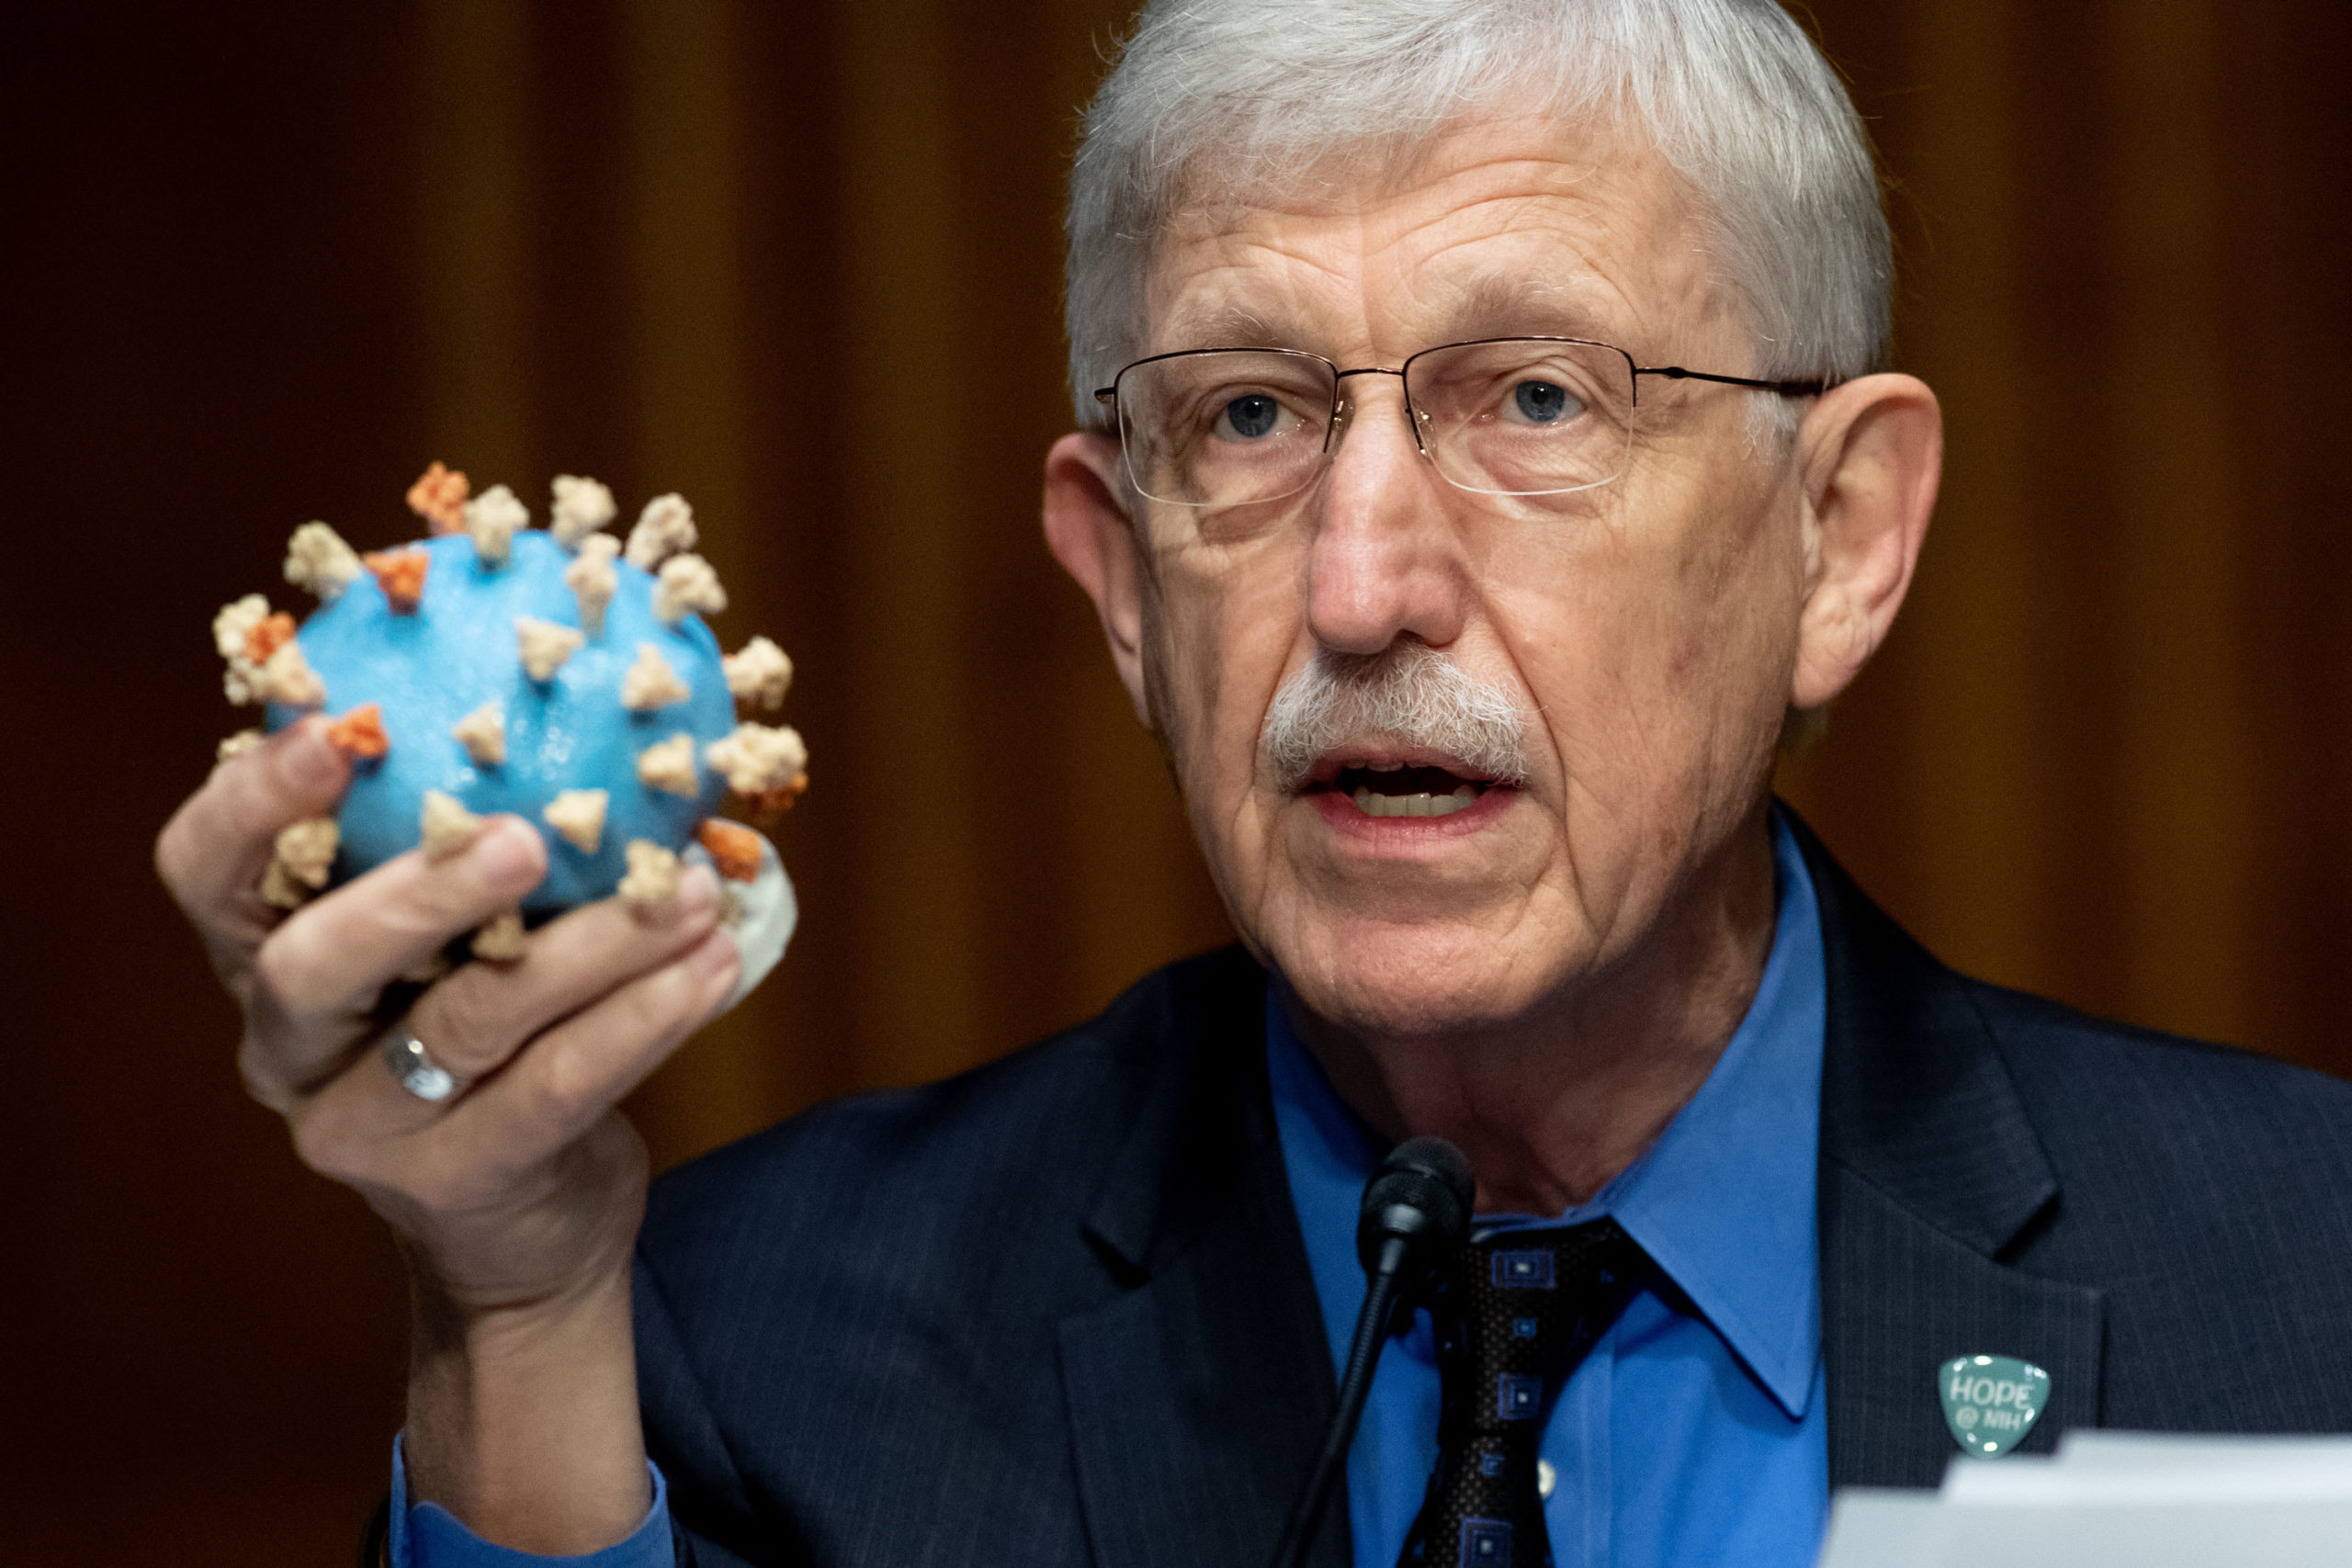 NIH guarantees Congress the U.S. will not skip security steps in approval